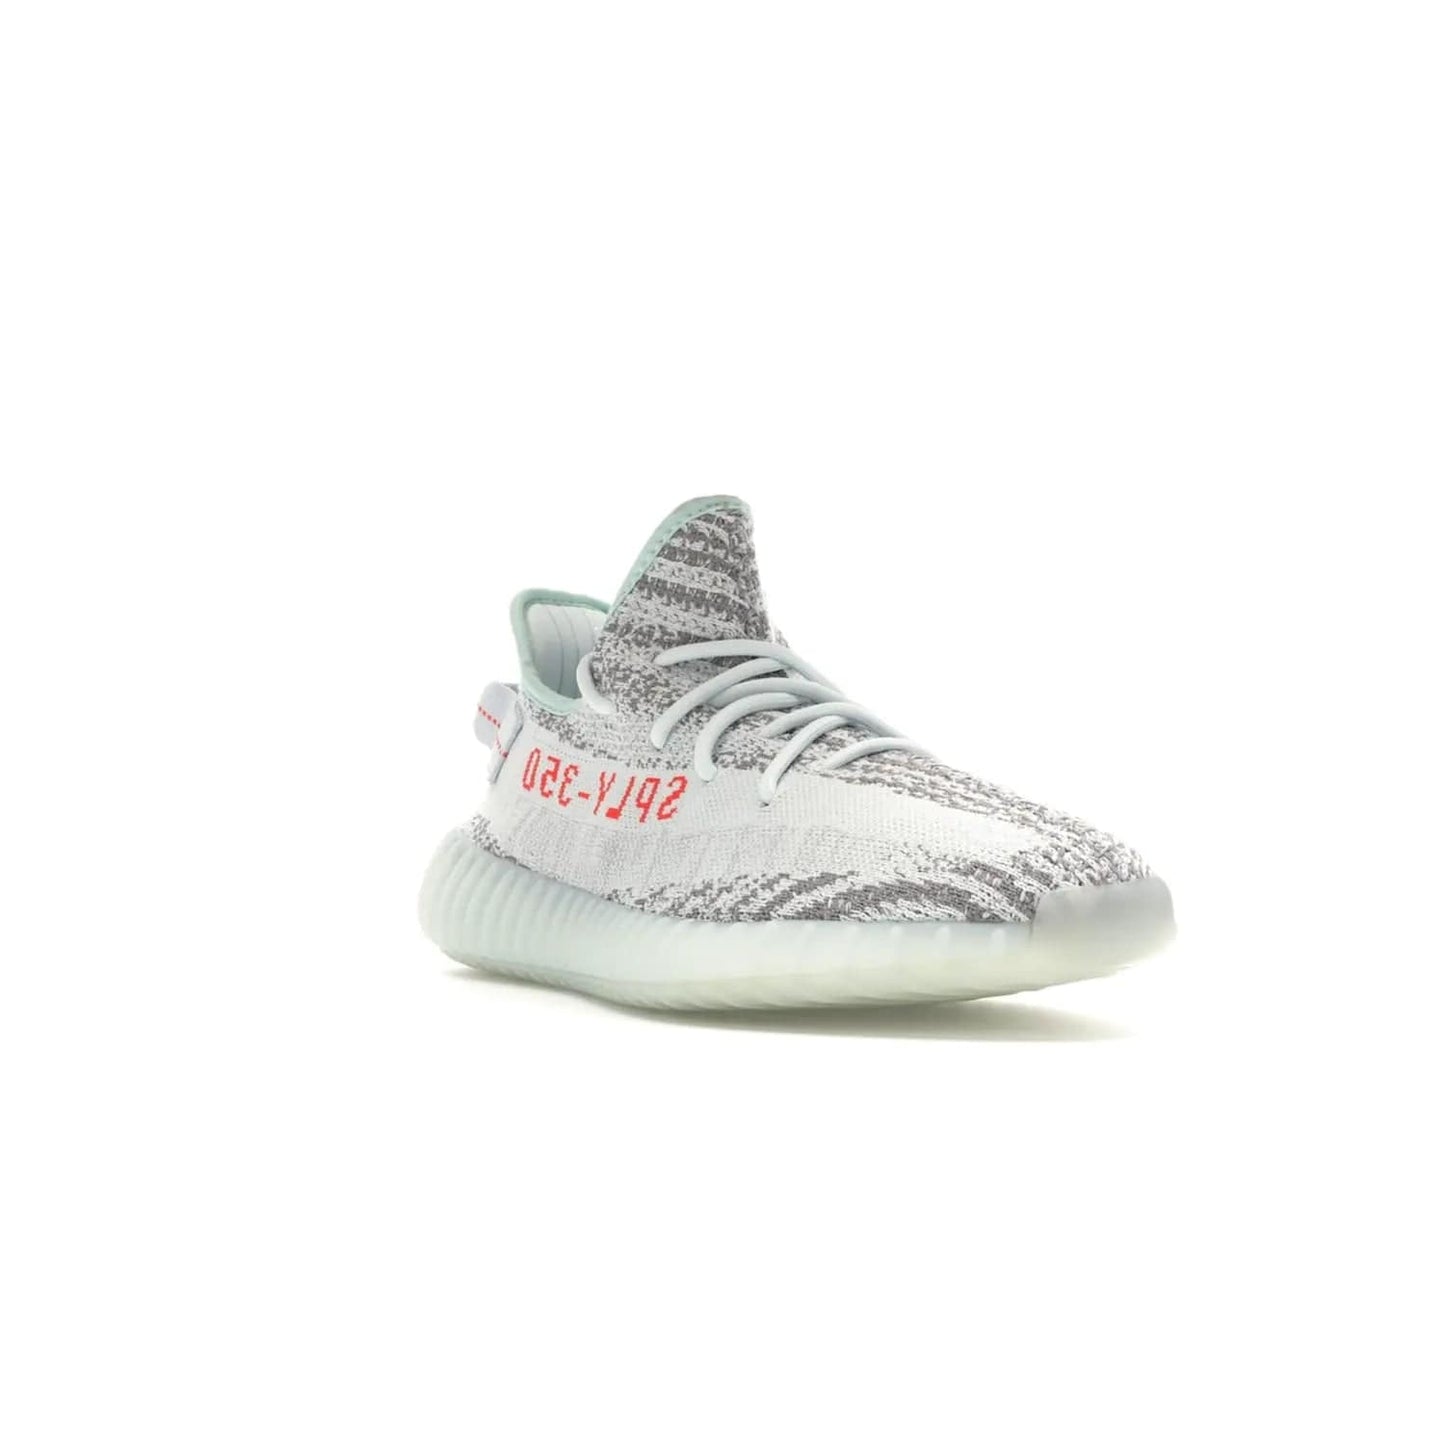 adidas Yeezy Boost 350 V2 Blue Tint - Image 7 - Only at www.BallersClubKickz.com - The adidas Yeezy Boost 350 V2 Blue Tint merges fashion and functionality with its Primeknit upper and Boost sole. Released in December 2017, this luxurious sneaker is perfect for making a stylish statement.